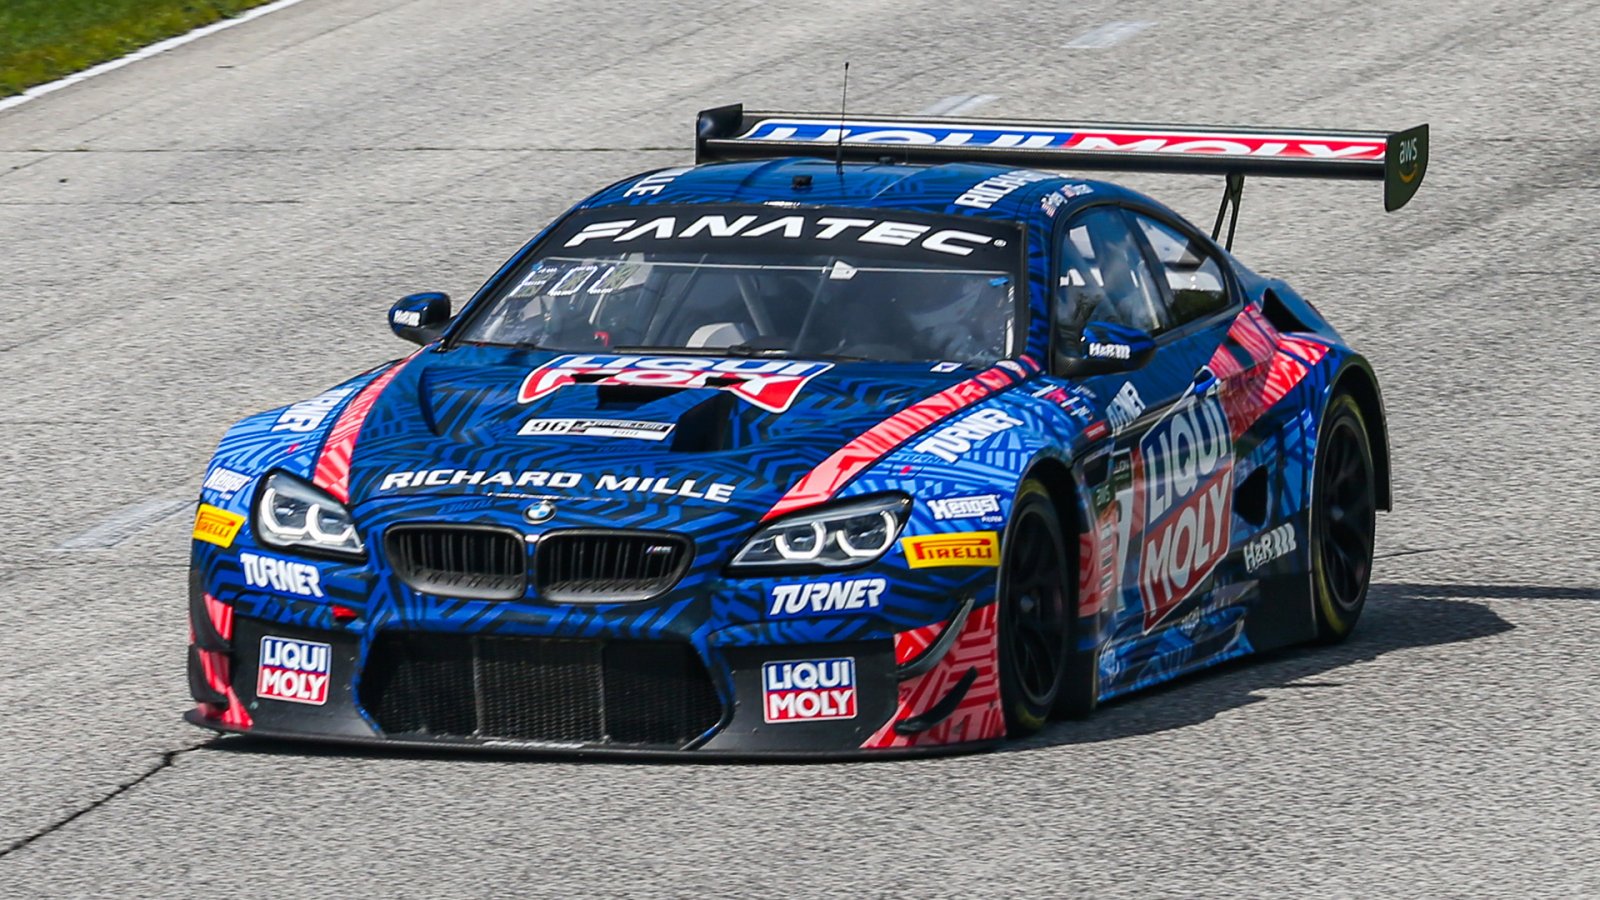 Dinan/Foley, BMW Take First Win of the Season at Second Road America Competition